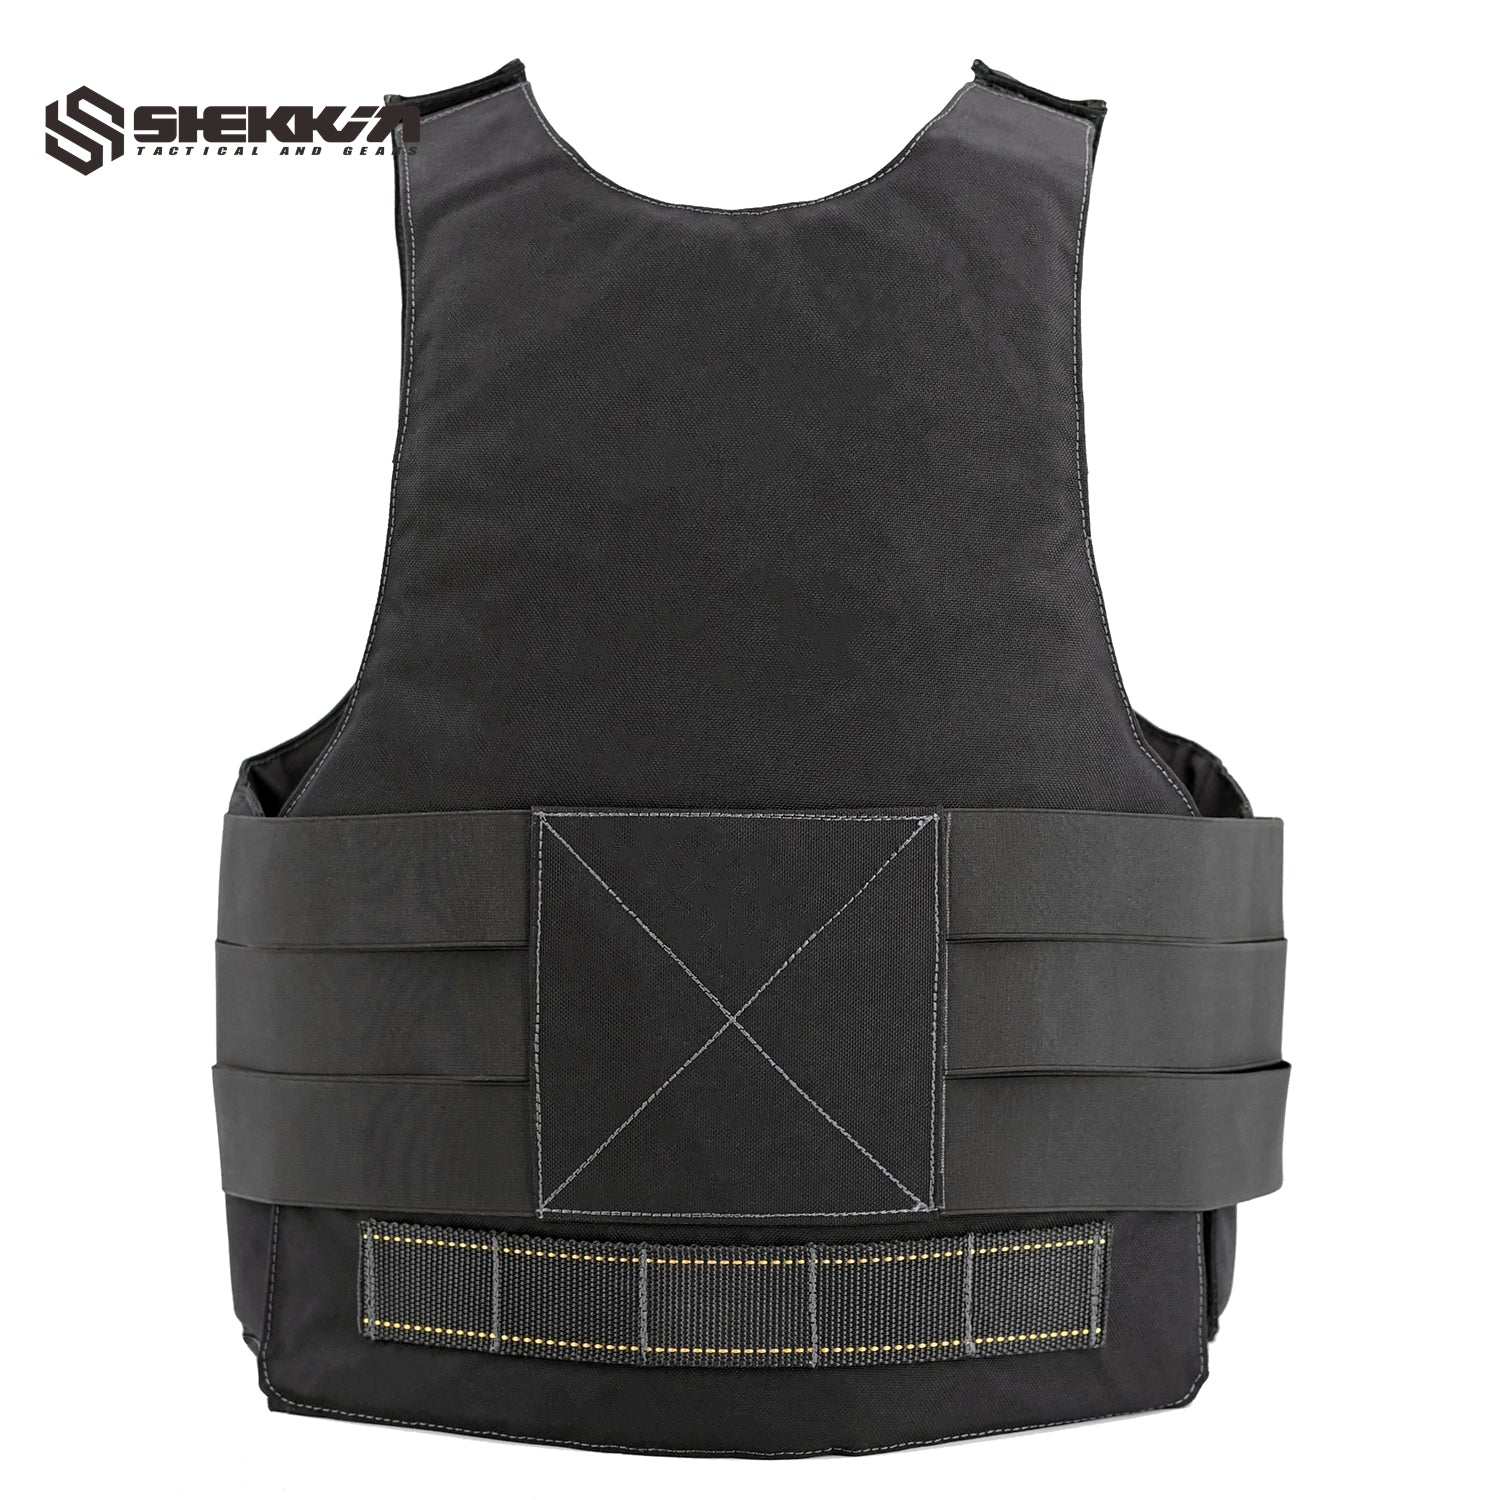 TG FAUST style NATO Special Forces Body Armor - Shekkin Gears